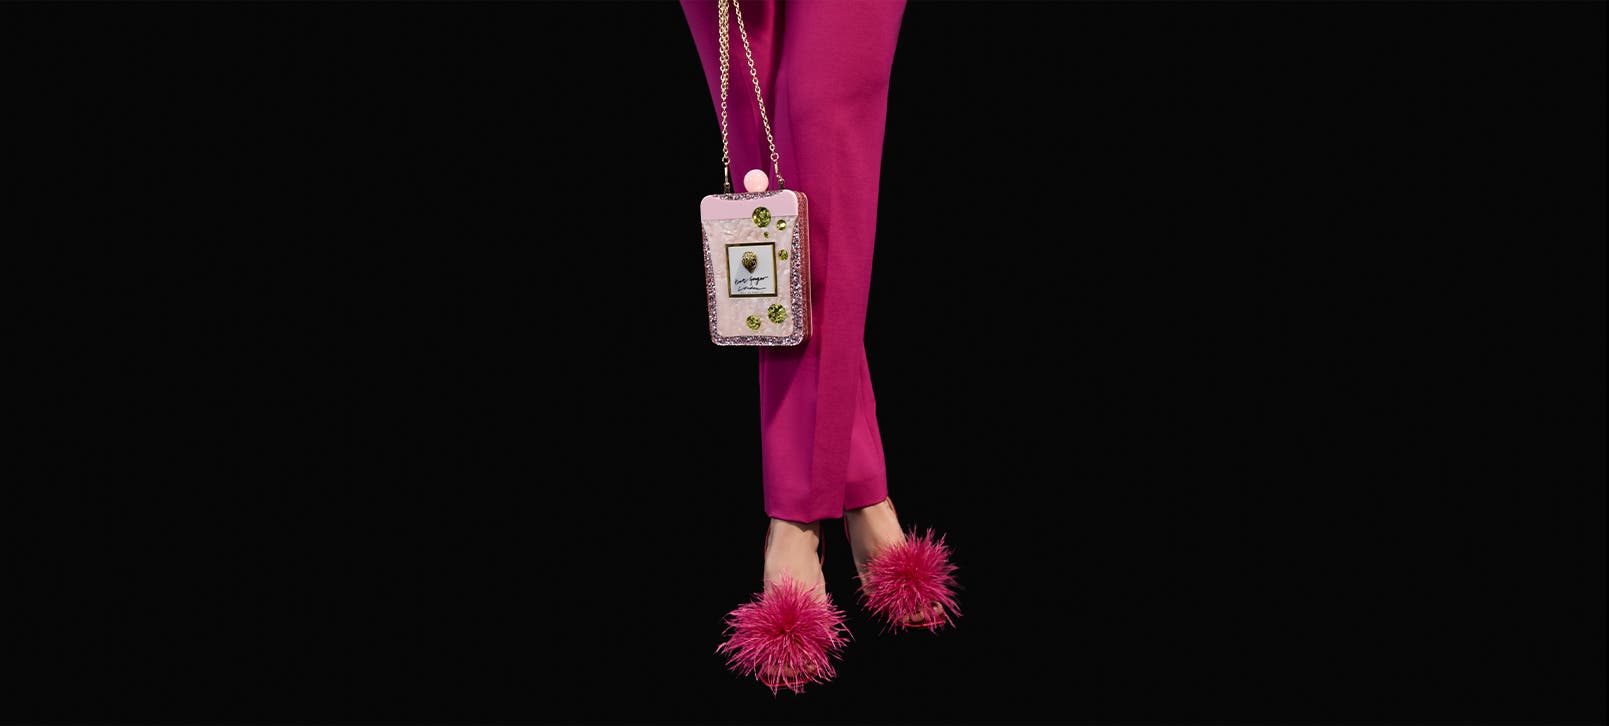 Model wearing magenta pants, shoes with magenta feathers and pink handbag.